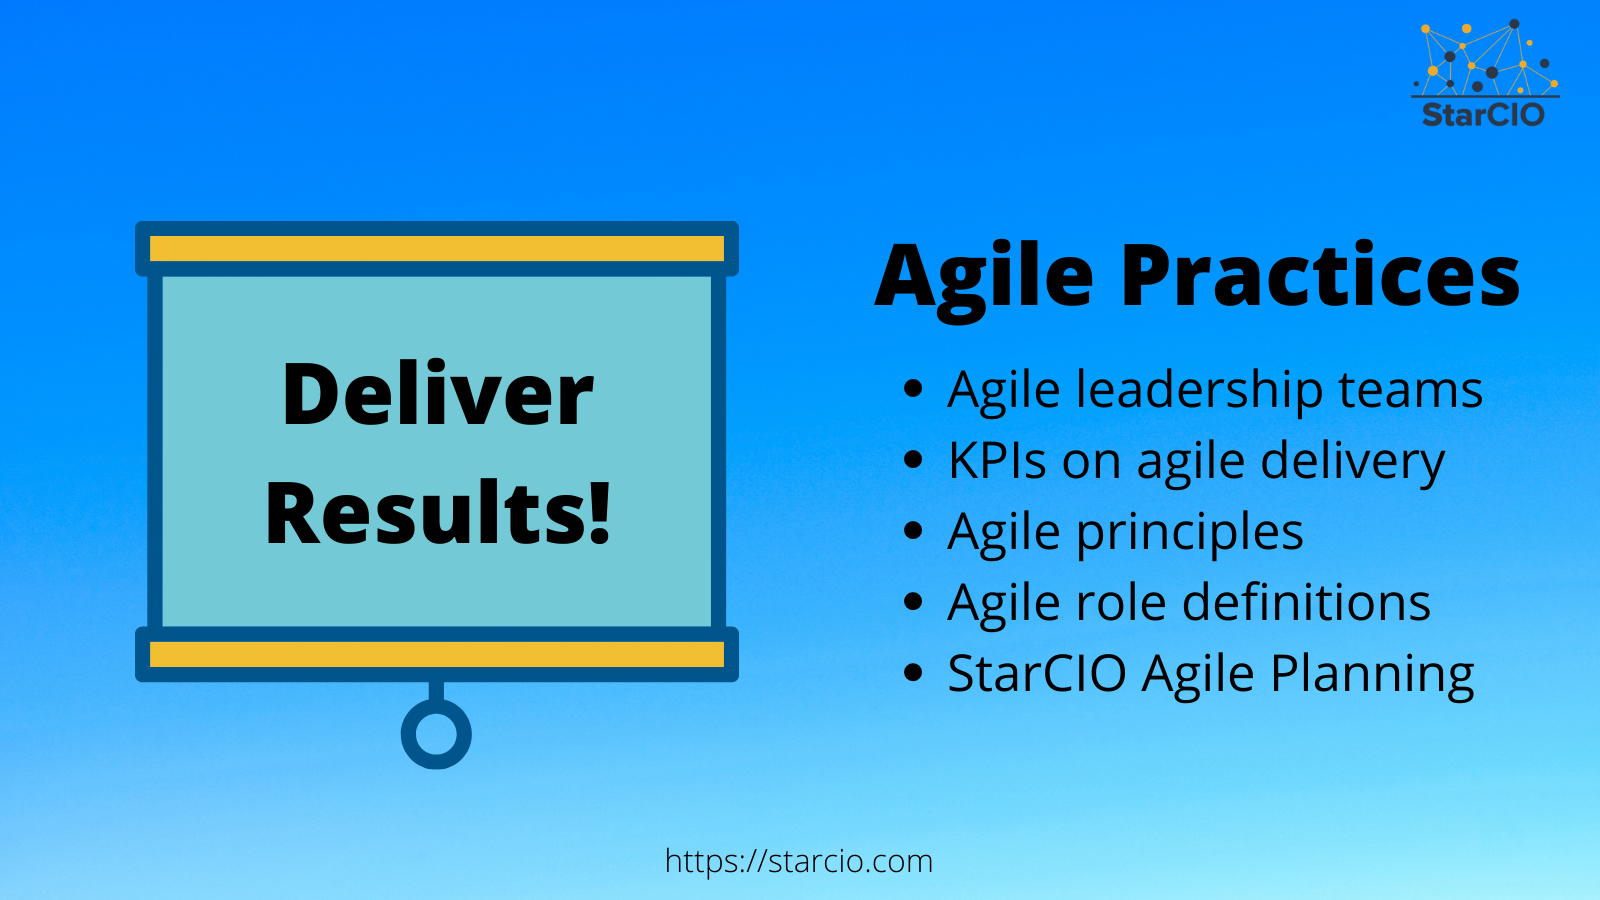 StarCIO Agile Planning and Agile Delivery